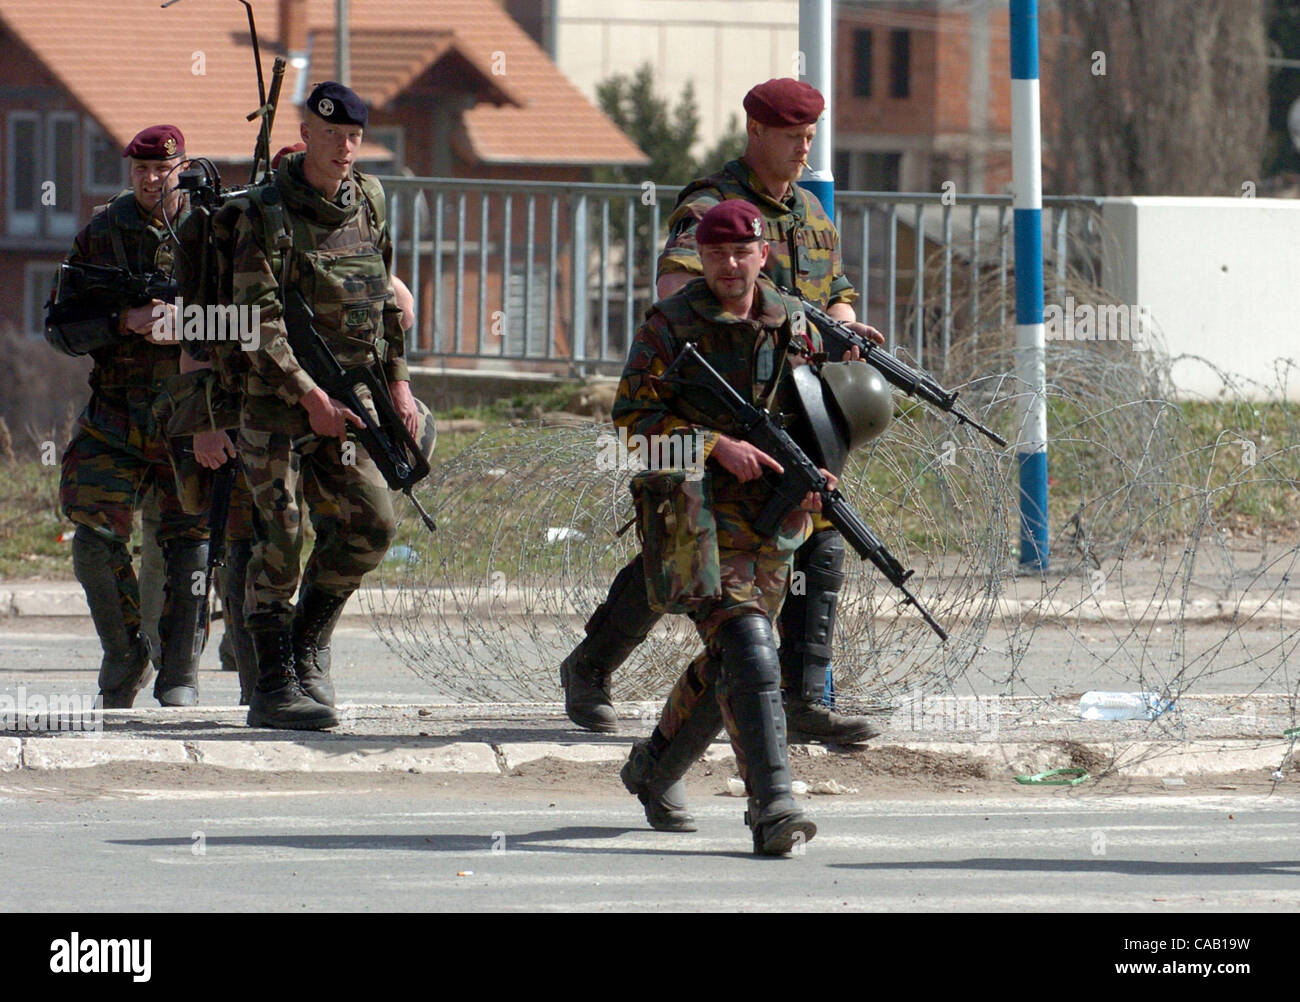 Mar 22, 2004; Kosovo, SERBIA; Belgium soldiers, part of NATO-led peacekeepers in Kosovo (KFOR), during patrol in the North part of Kosovska Mitrovica, near the bridge that divides this troubled city into North (controlled by Serbs) and South (controlled by Albanians). Riots broke out in at least six Stock Photo